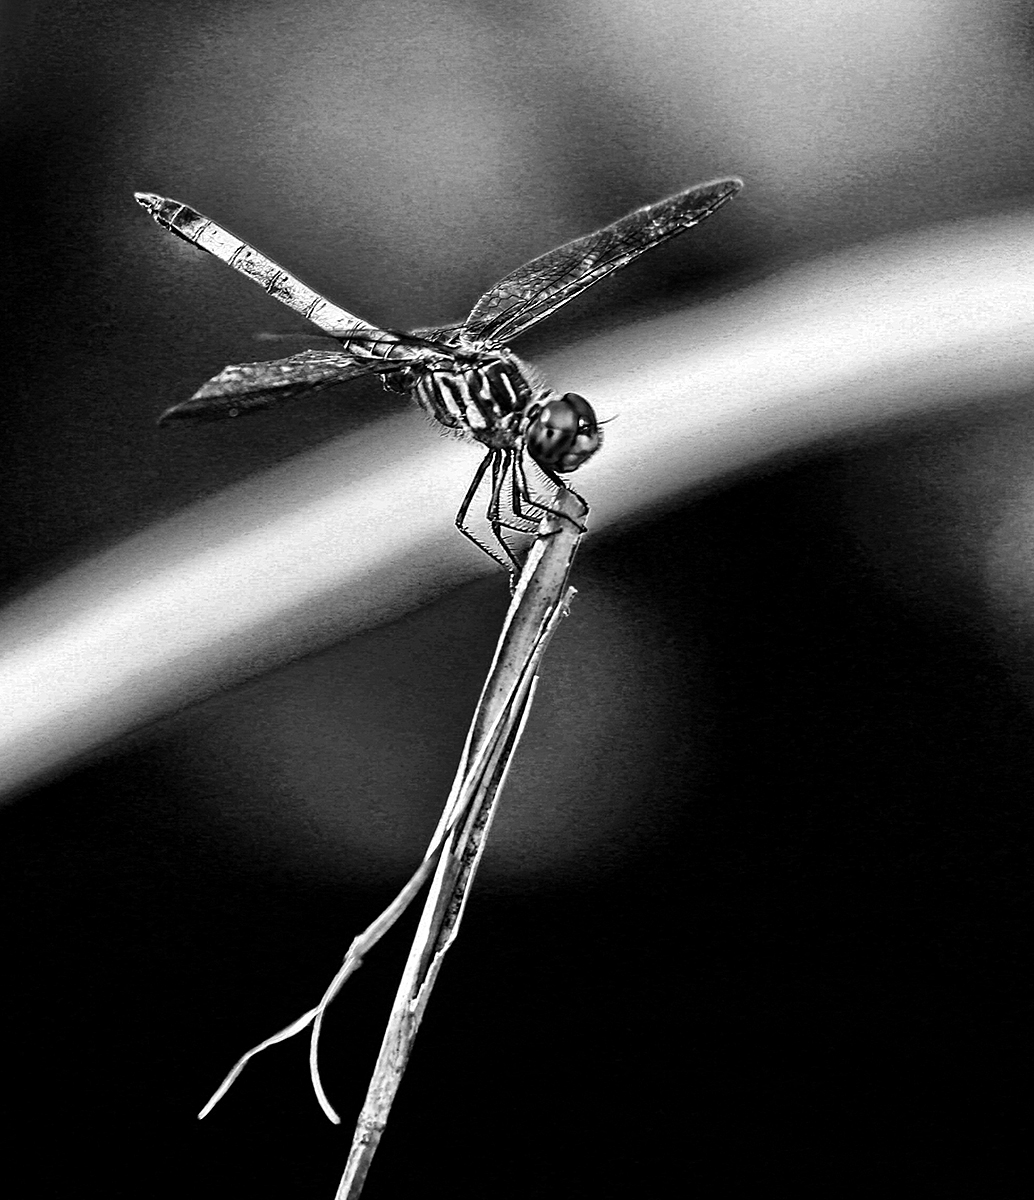 Dragonfly in Black and White